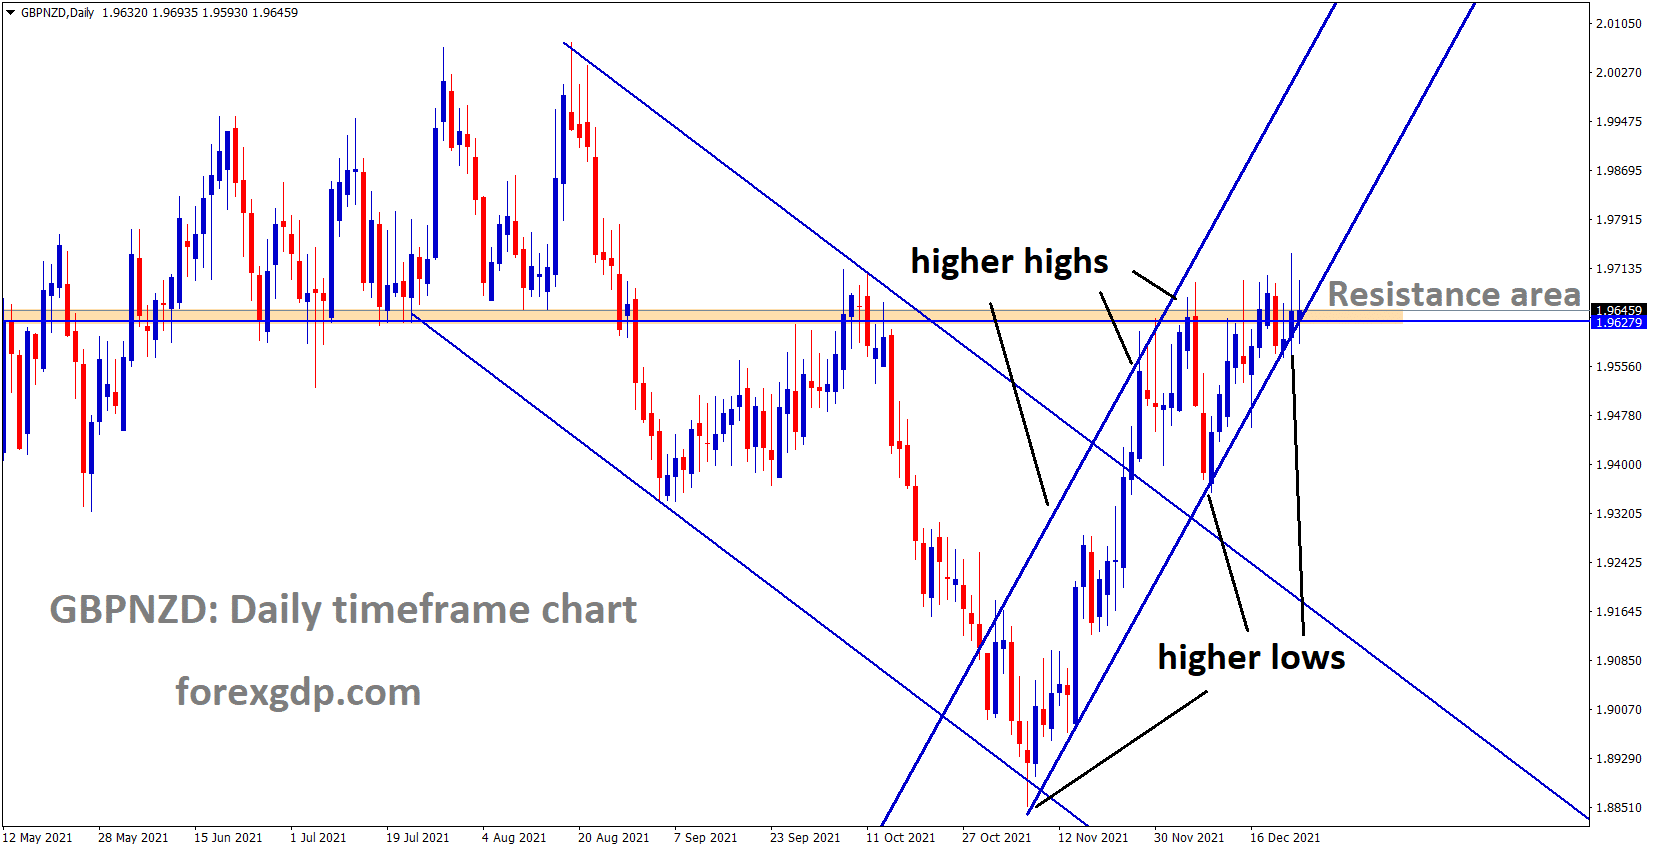 GBPNZD is moving in an Ascending channel and the market has reached the horizontal resistance area and consolidated around the resistance area.